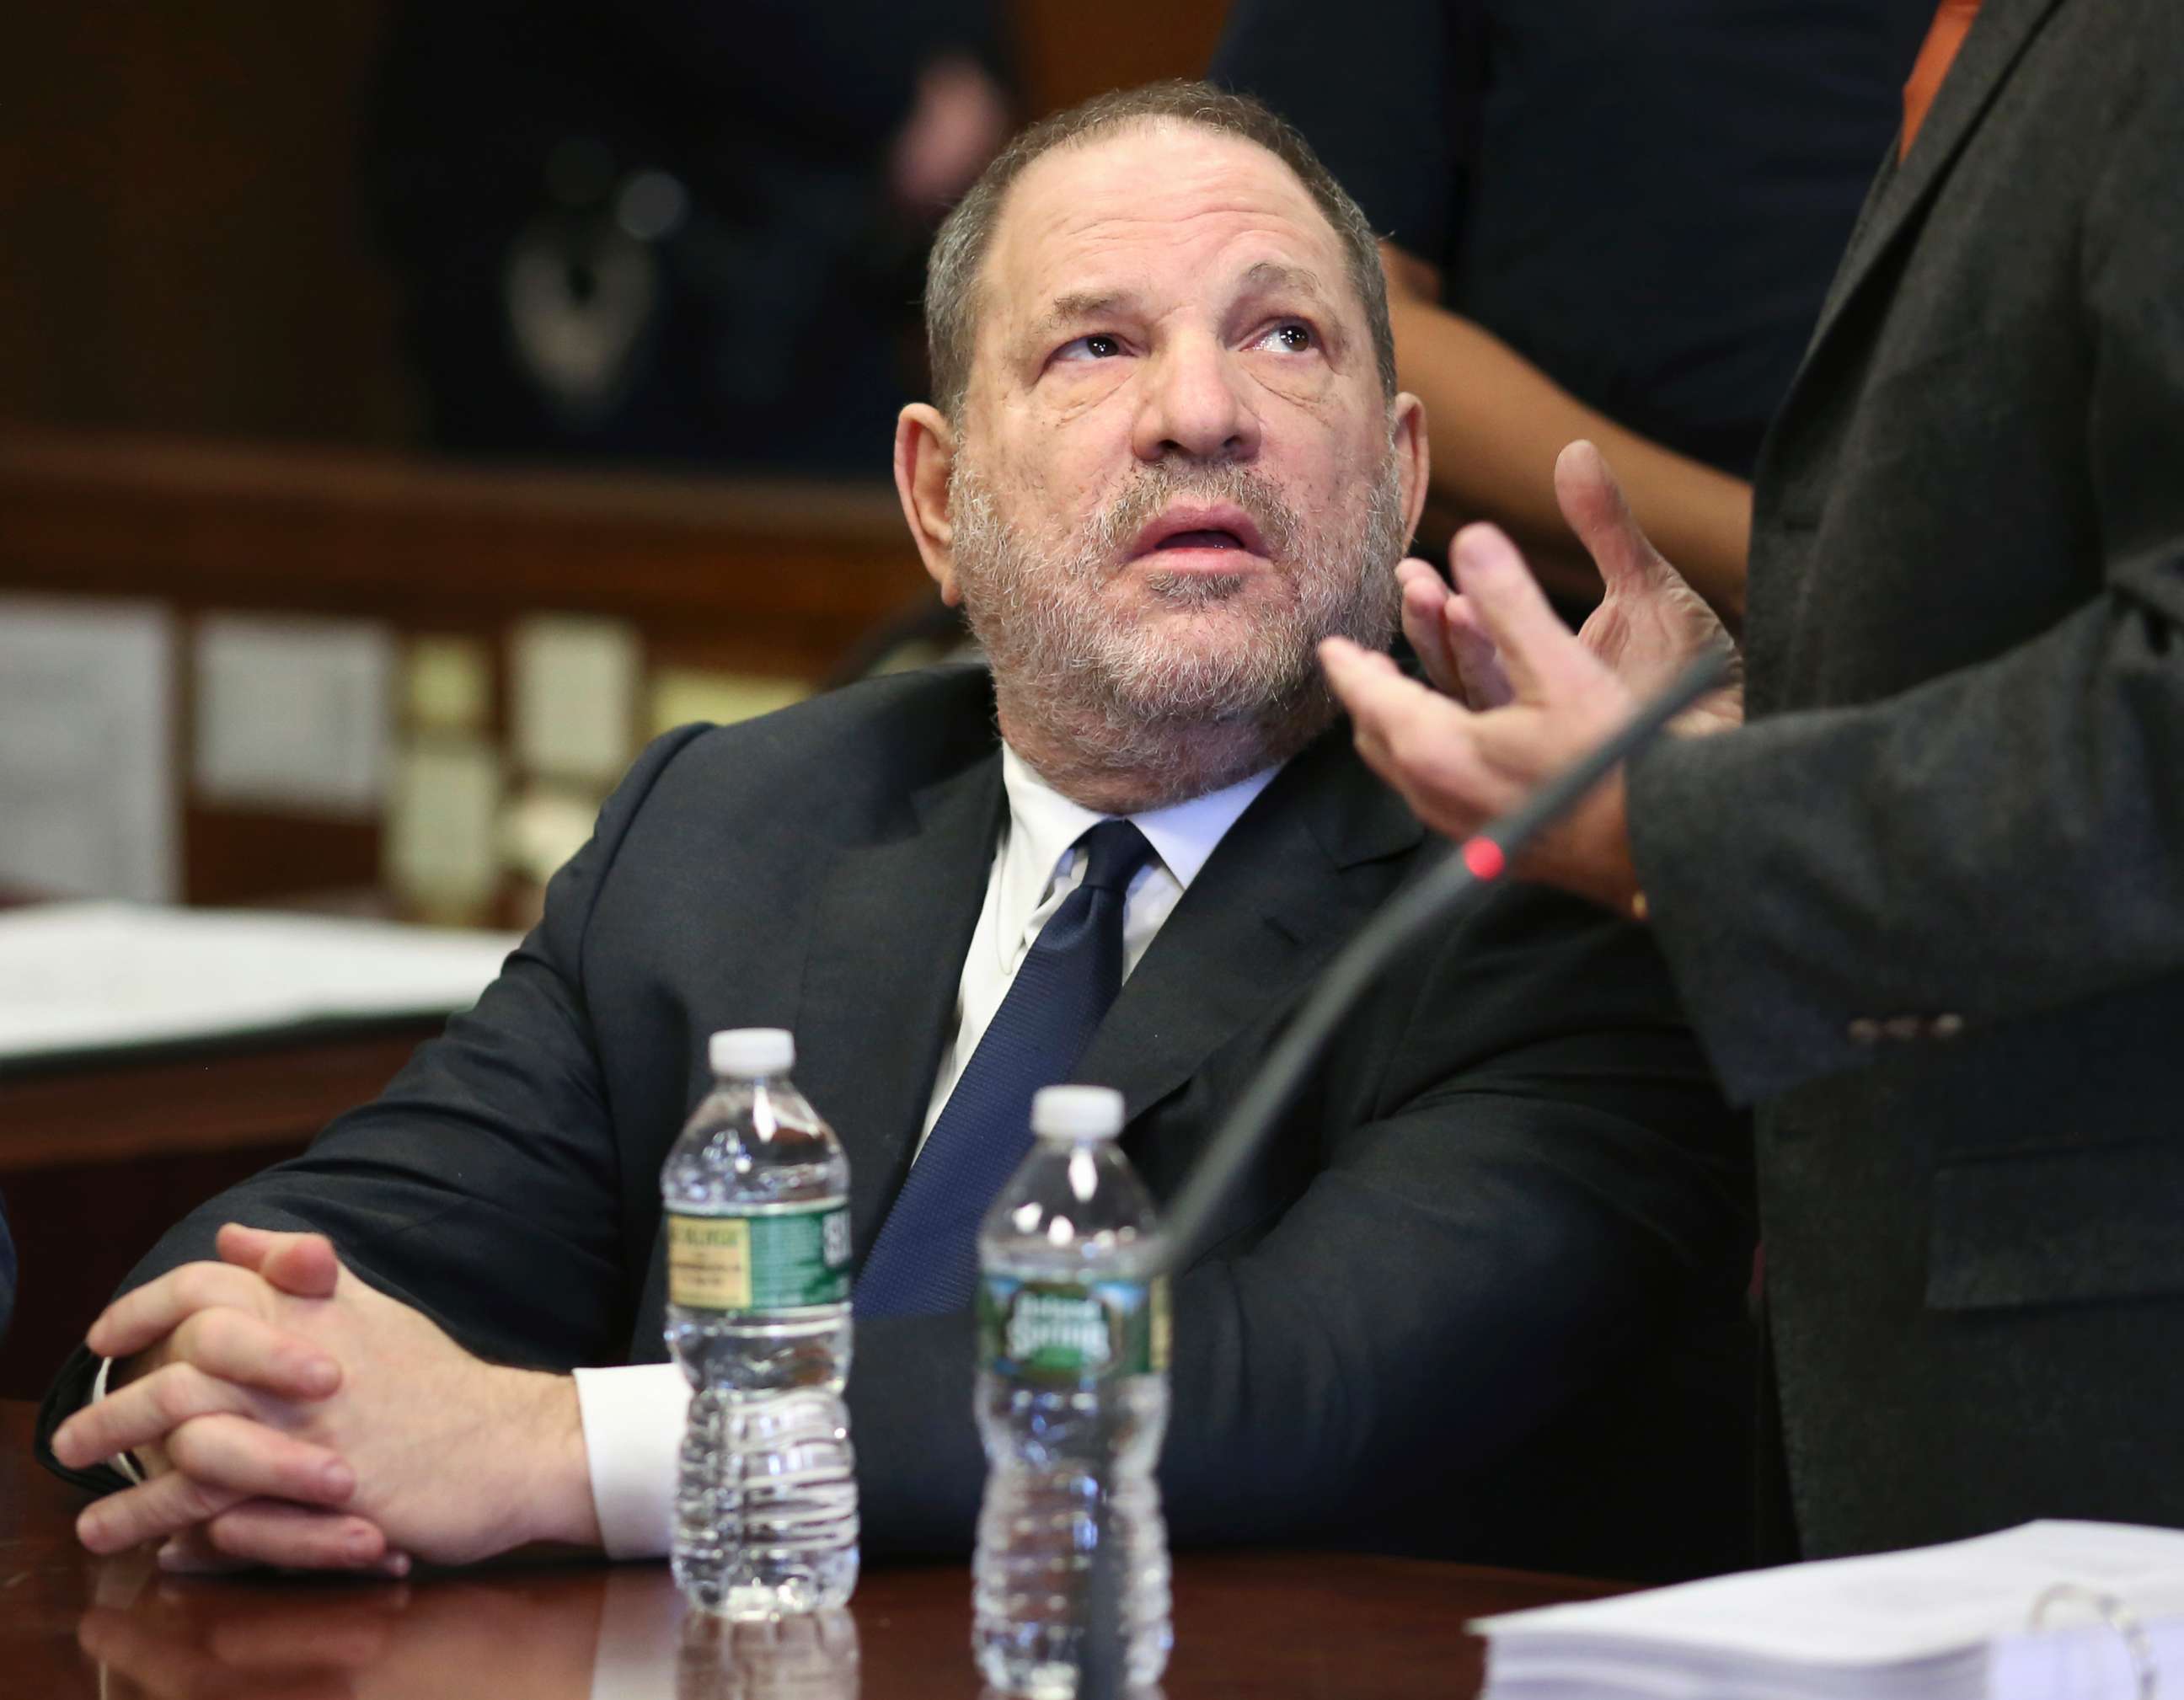 PHOTO: Harvey Weinstein talks to his lawyer during a court appearance at New York Supreme Court,  Dec. 20, 2018, in N.Y.